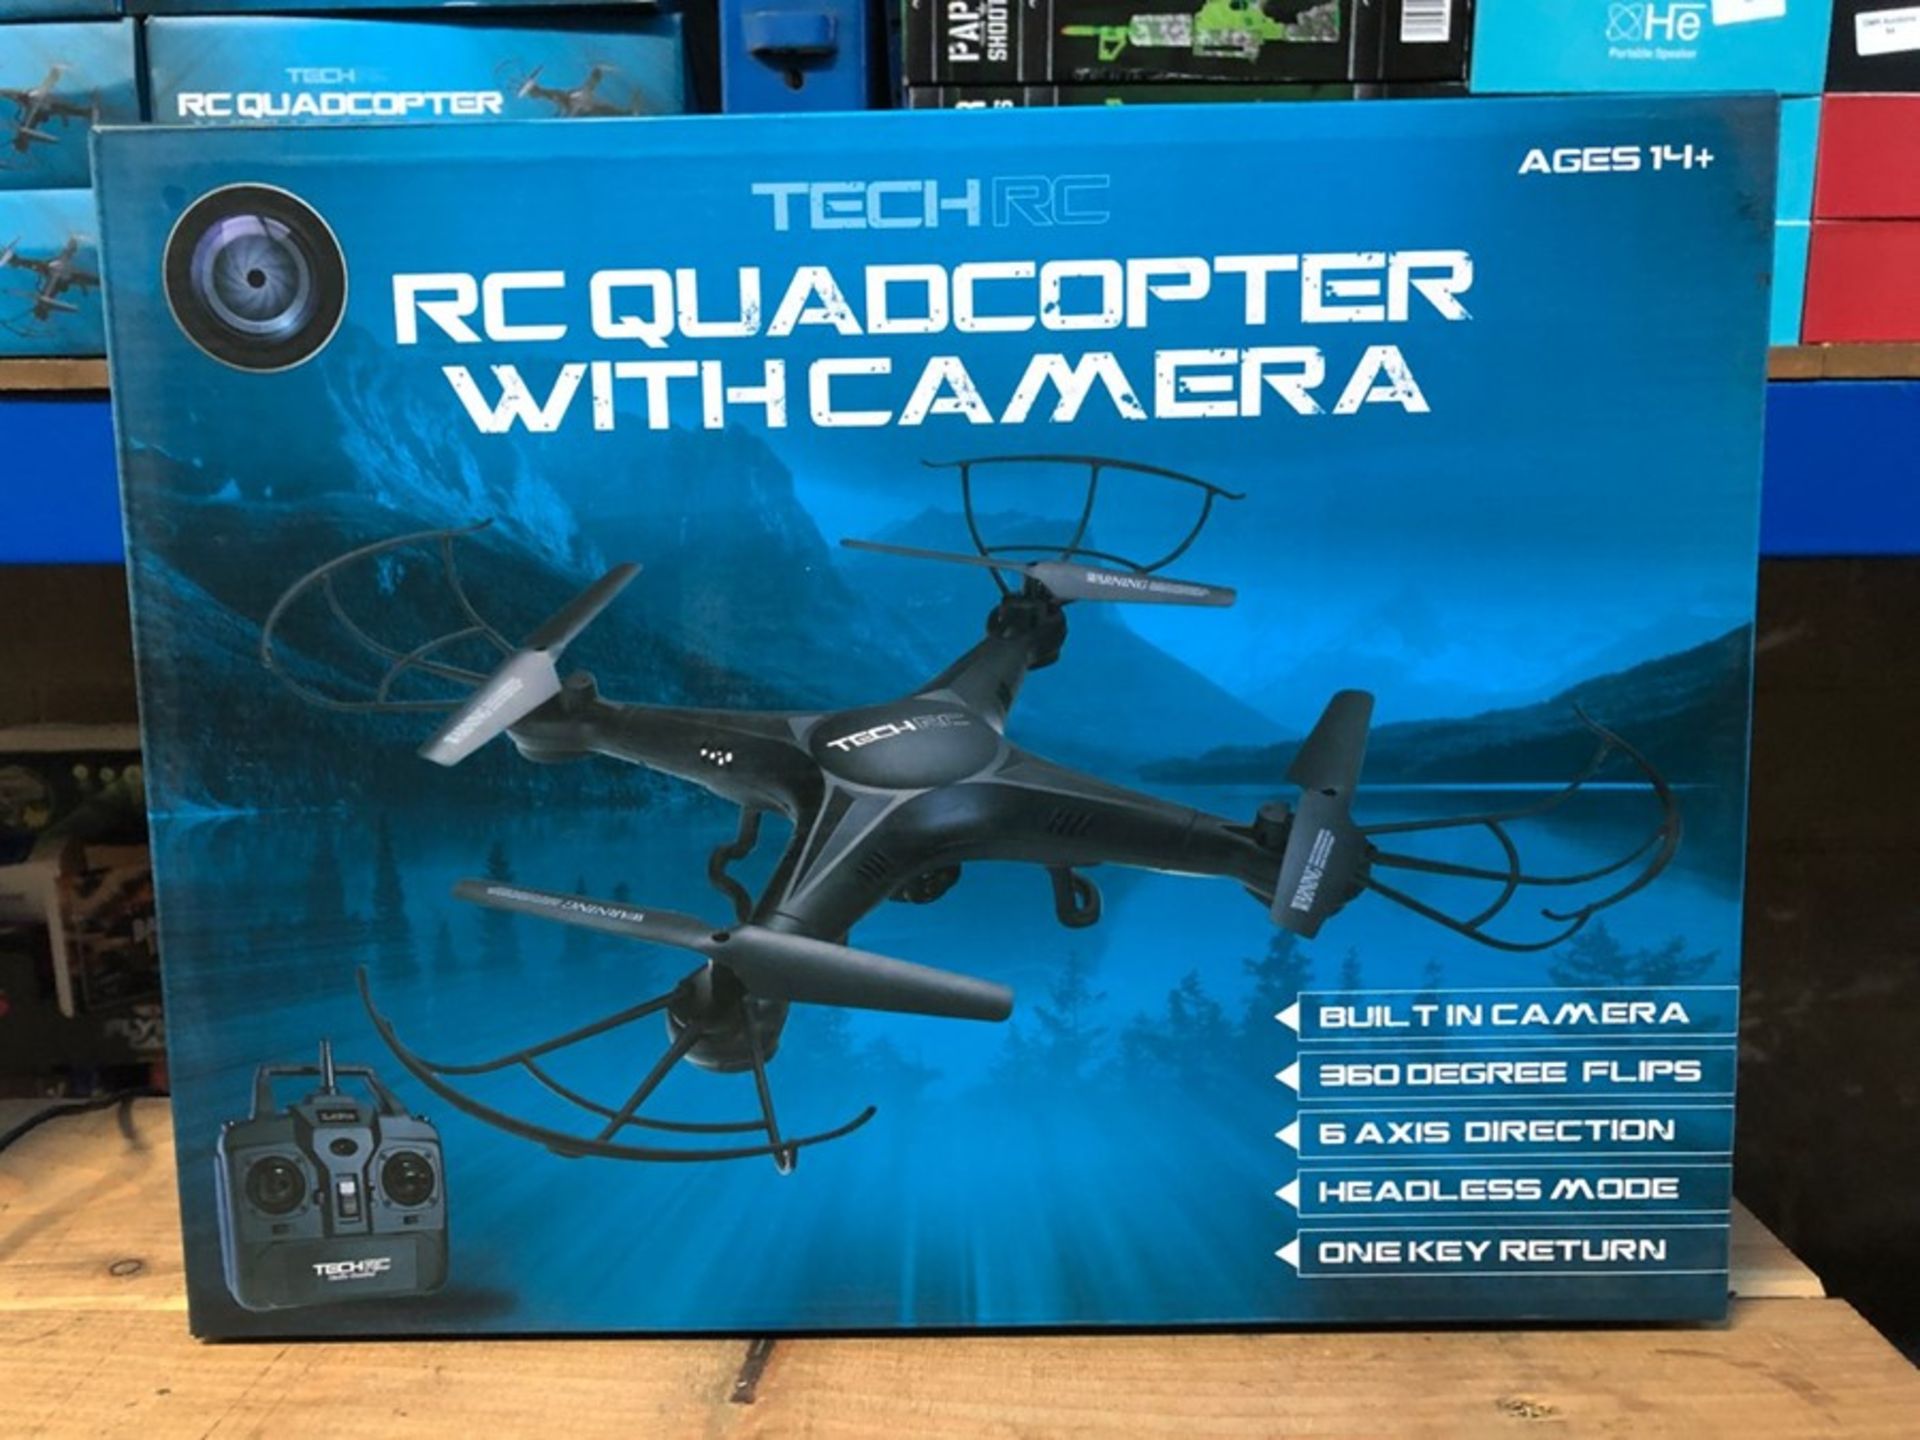 6 X RC QUADCOPTERS WITH CAMERA / COMBINED RRP £120.00 / LIKE NEW